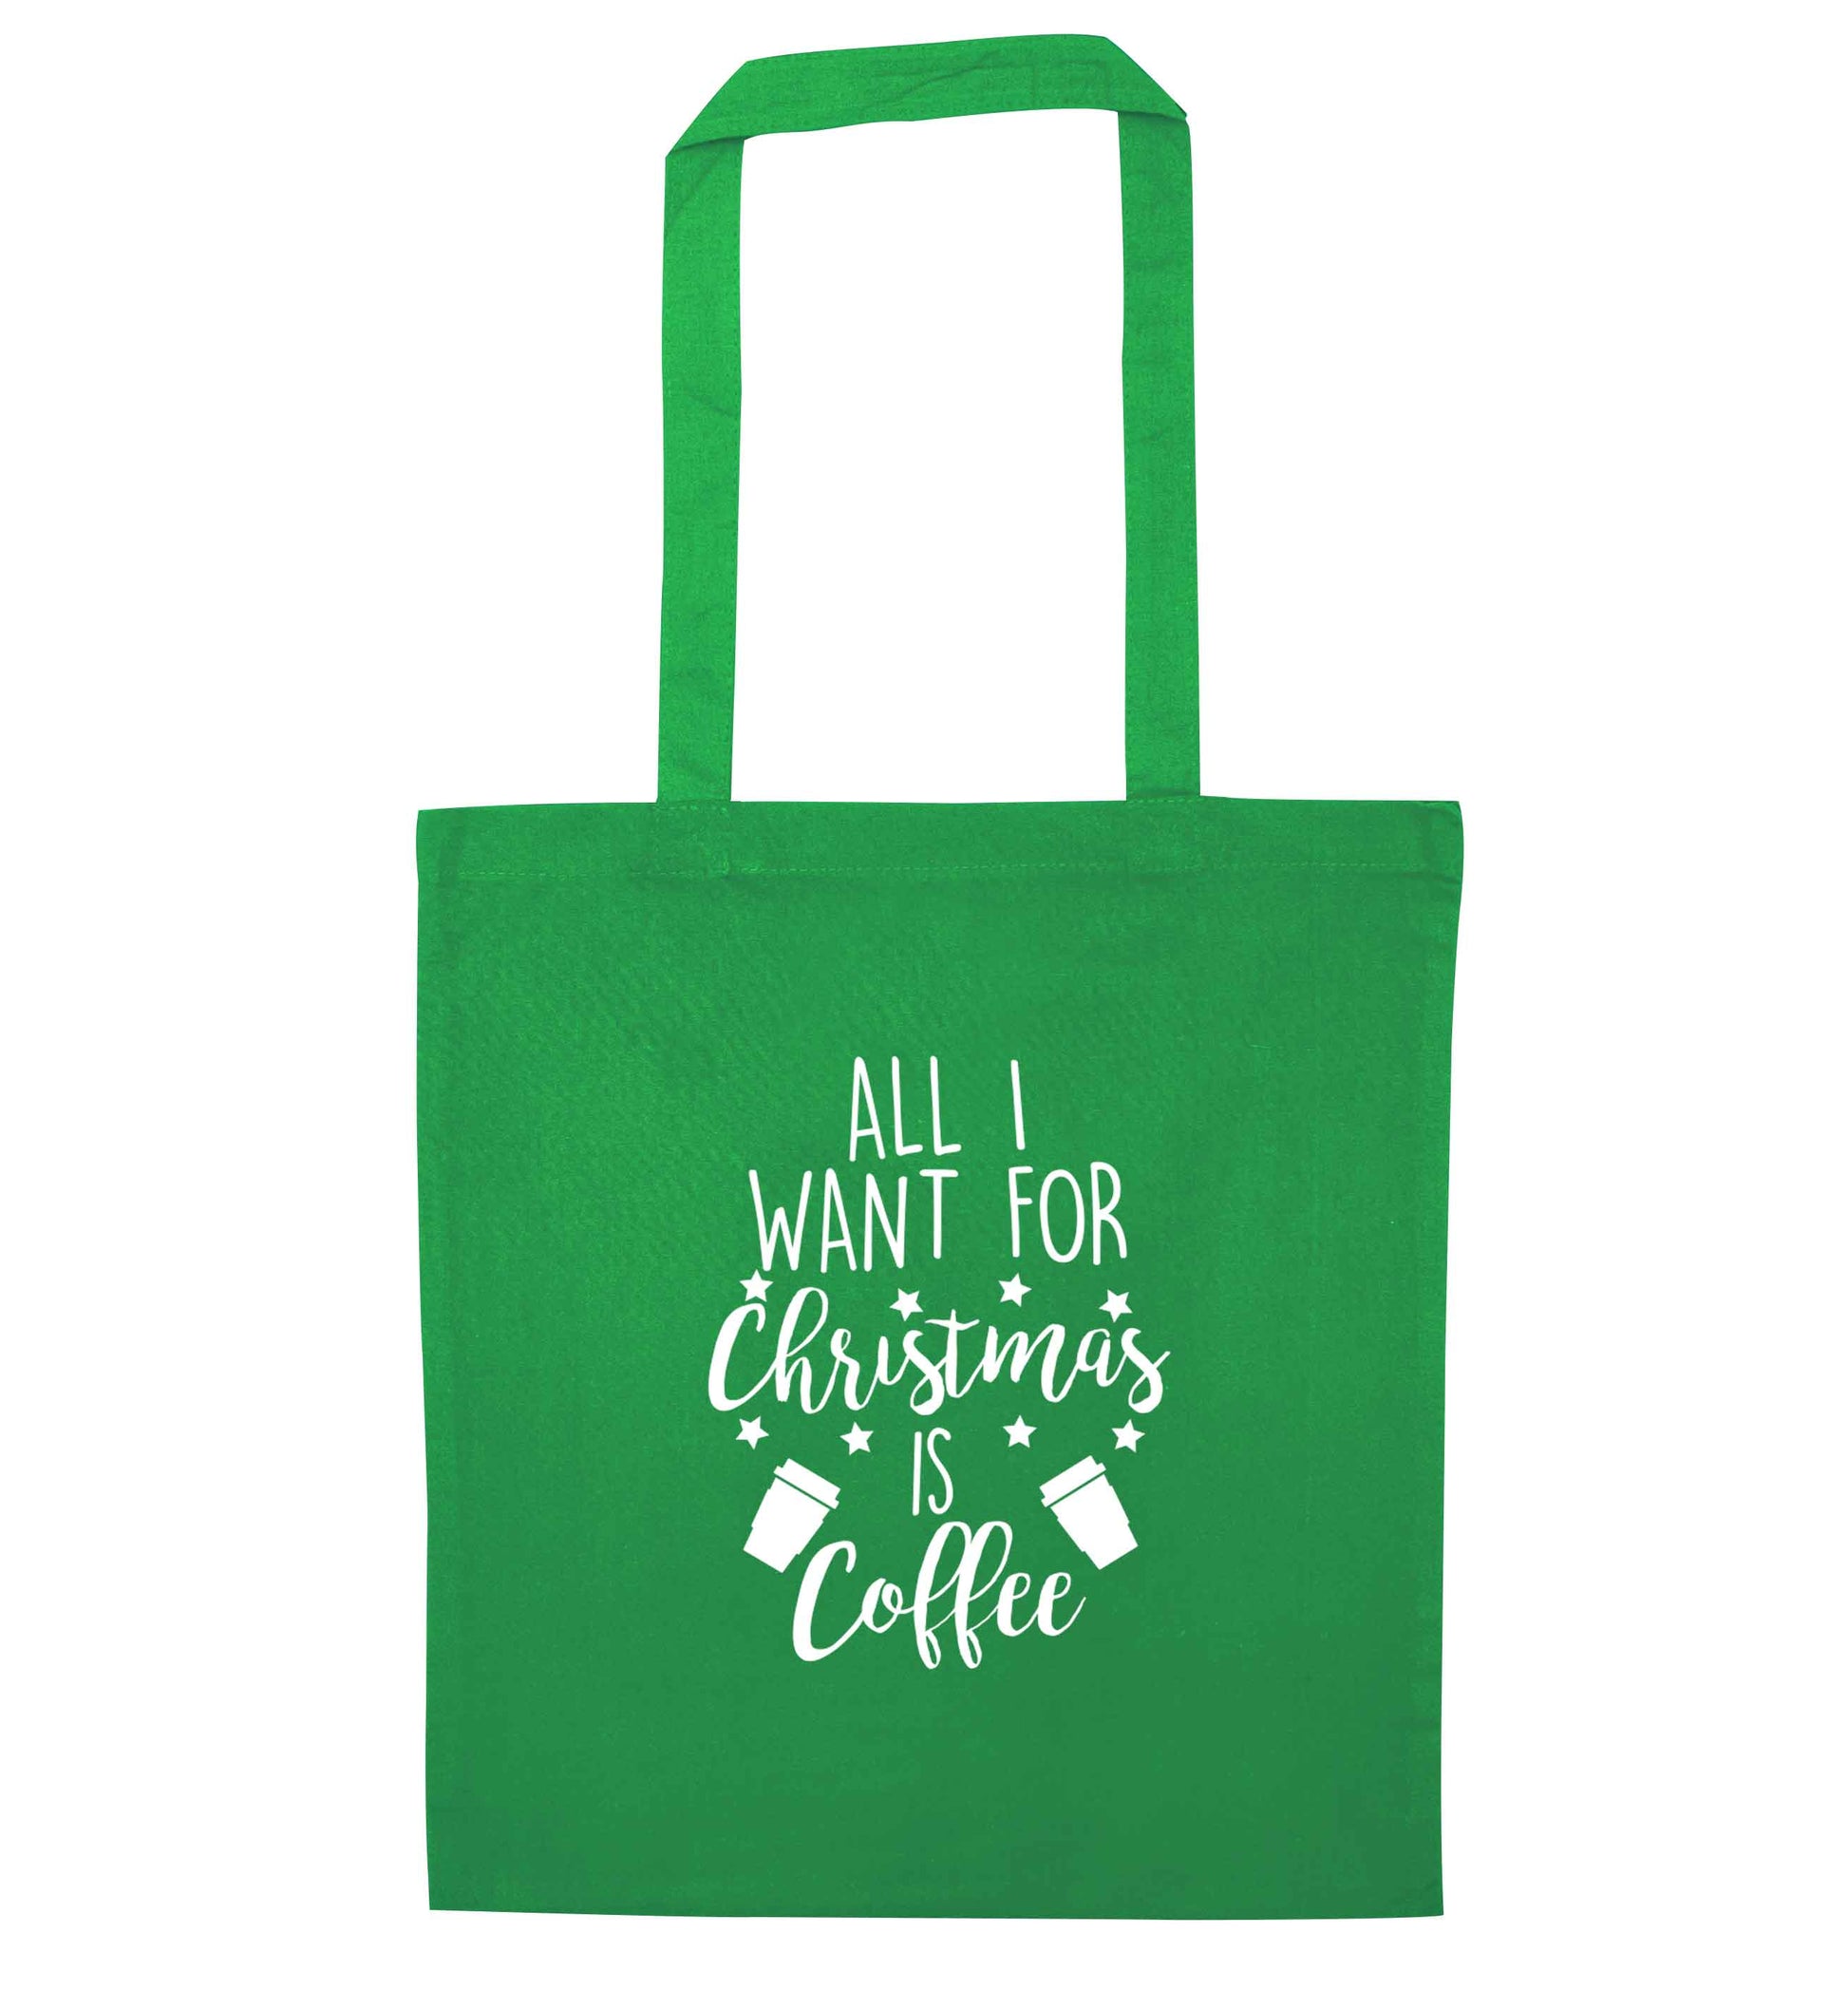 All I want for Christmas is coffee green tote bag